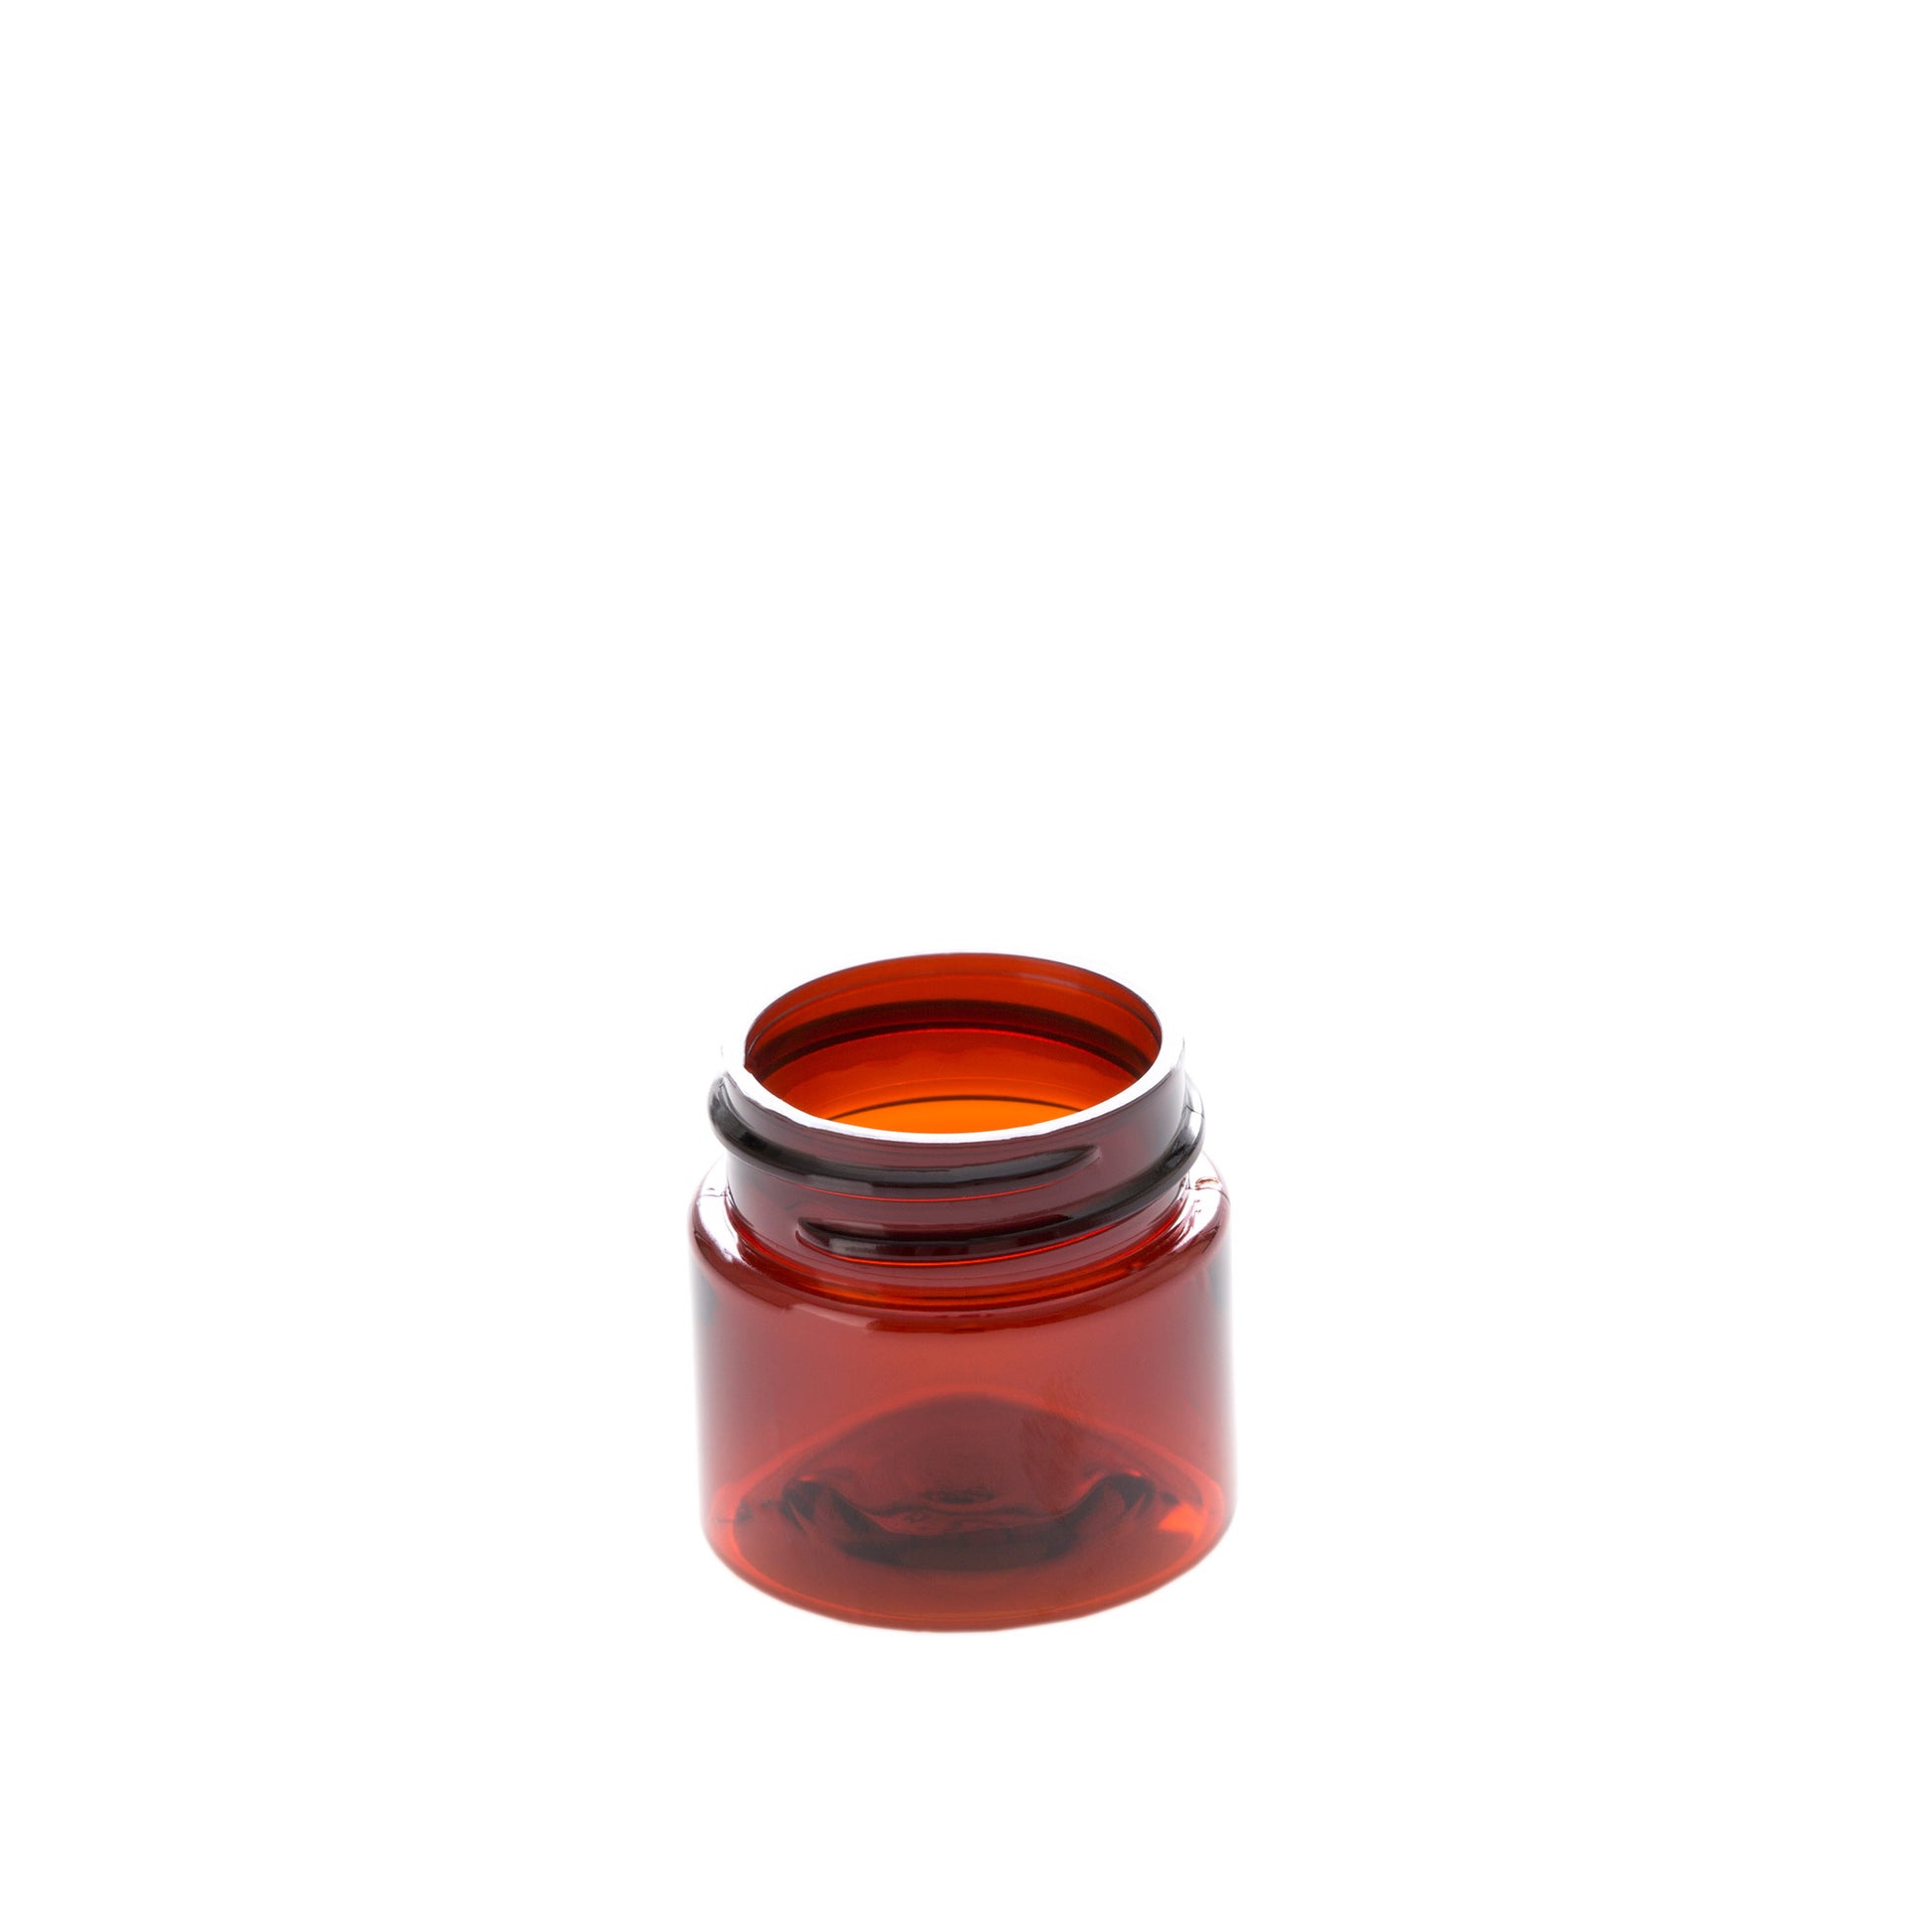 0.5 oz Straight Sided Amber Jar with No Closure